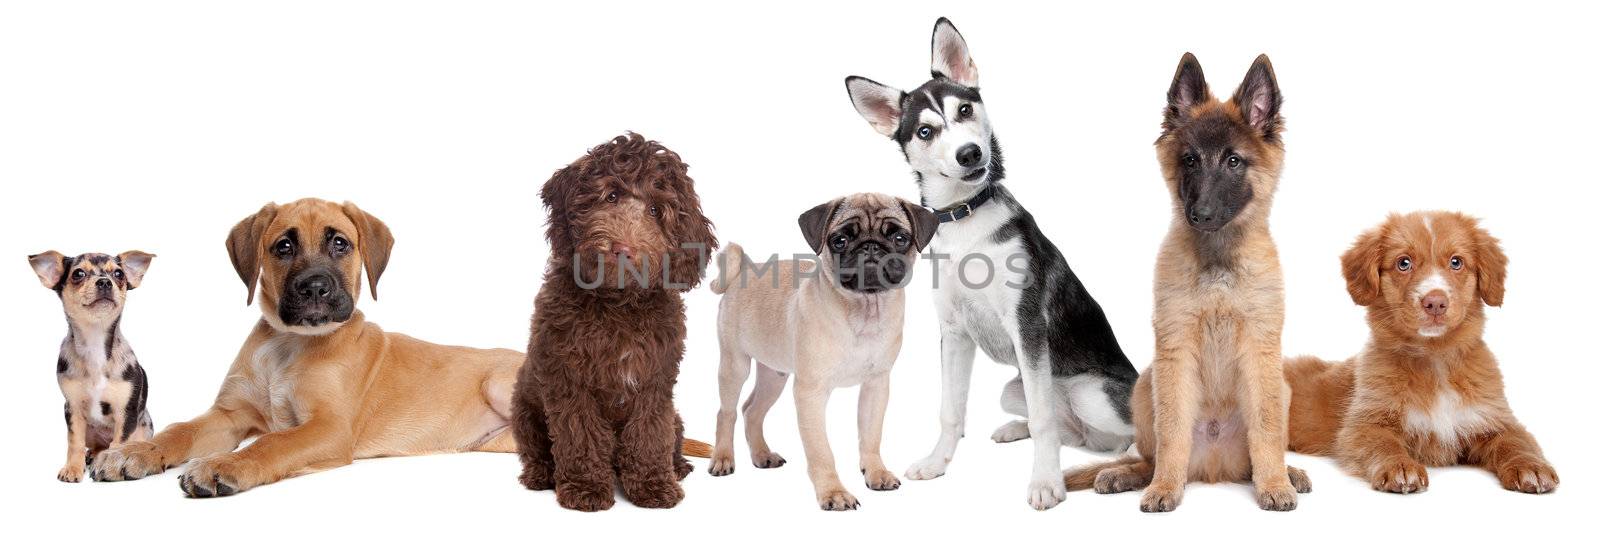 large group of puppies on a white background.from left to right,blue merle Chihuahua, mixed breed Mastiff, chocolate brown medium Labradoole,Pug,Siberean Husky,Belgium Shepherd and a Scotia Nova duck tolling retriever,isolated on a white background